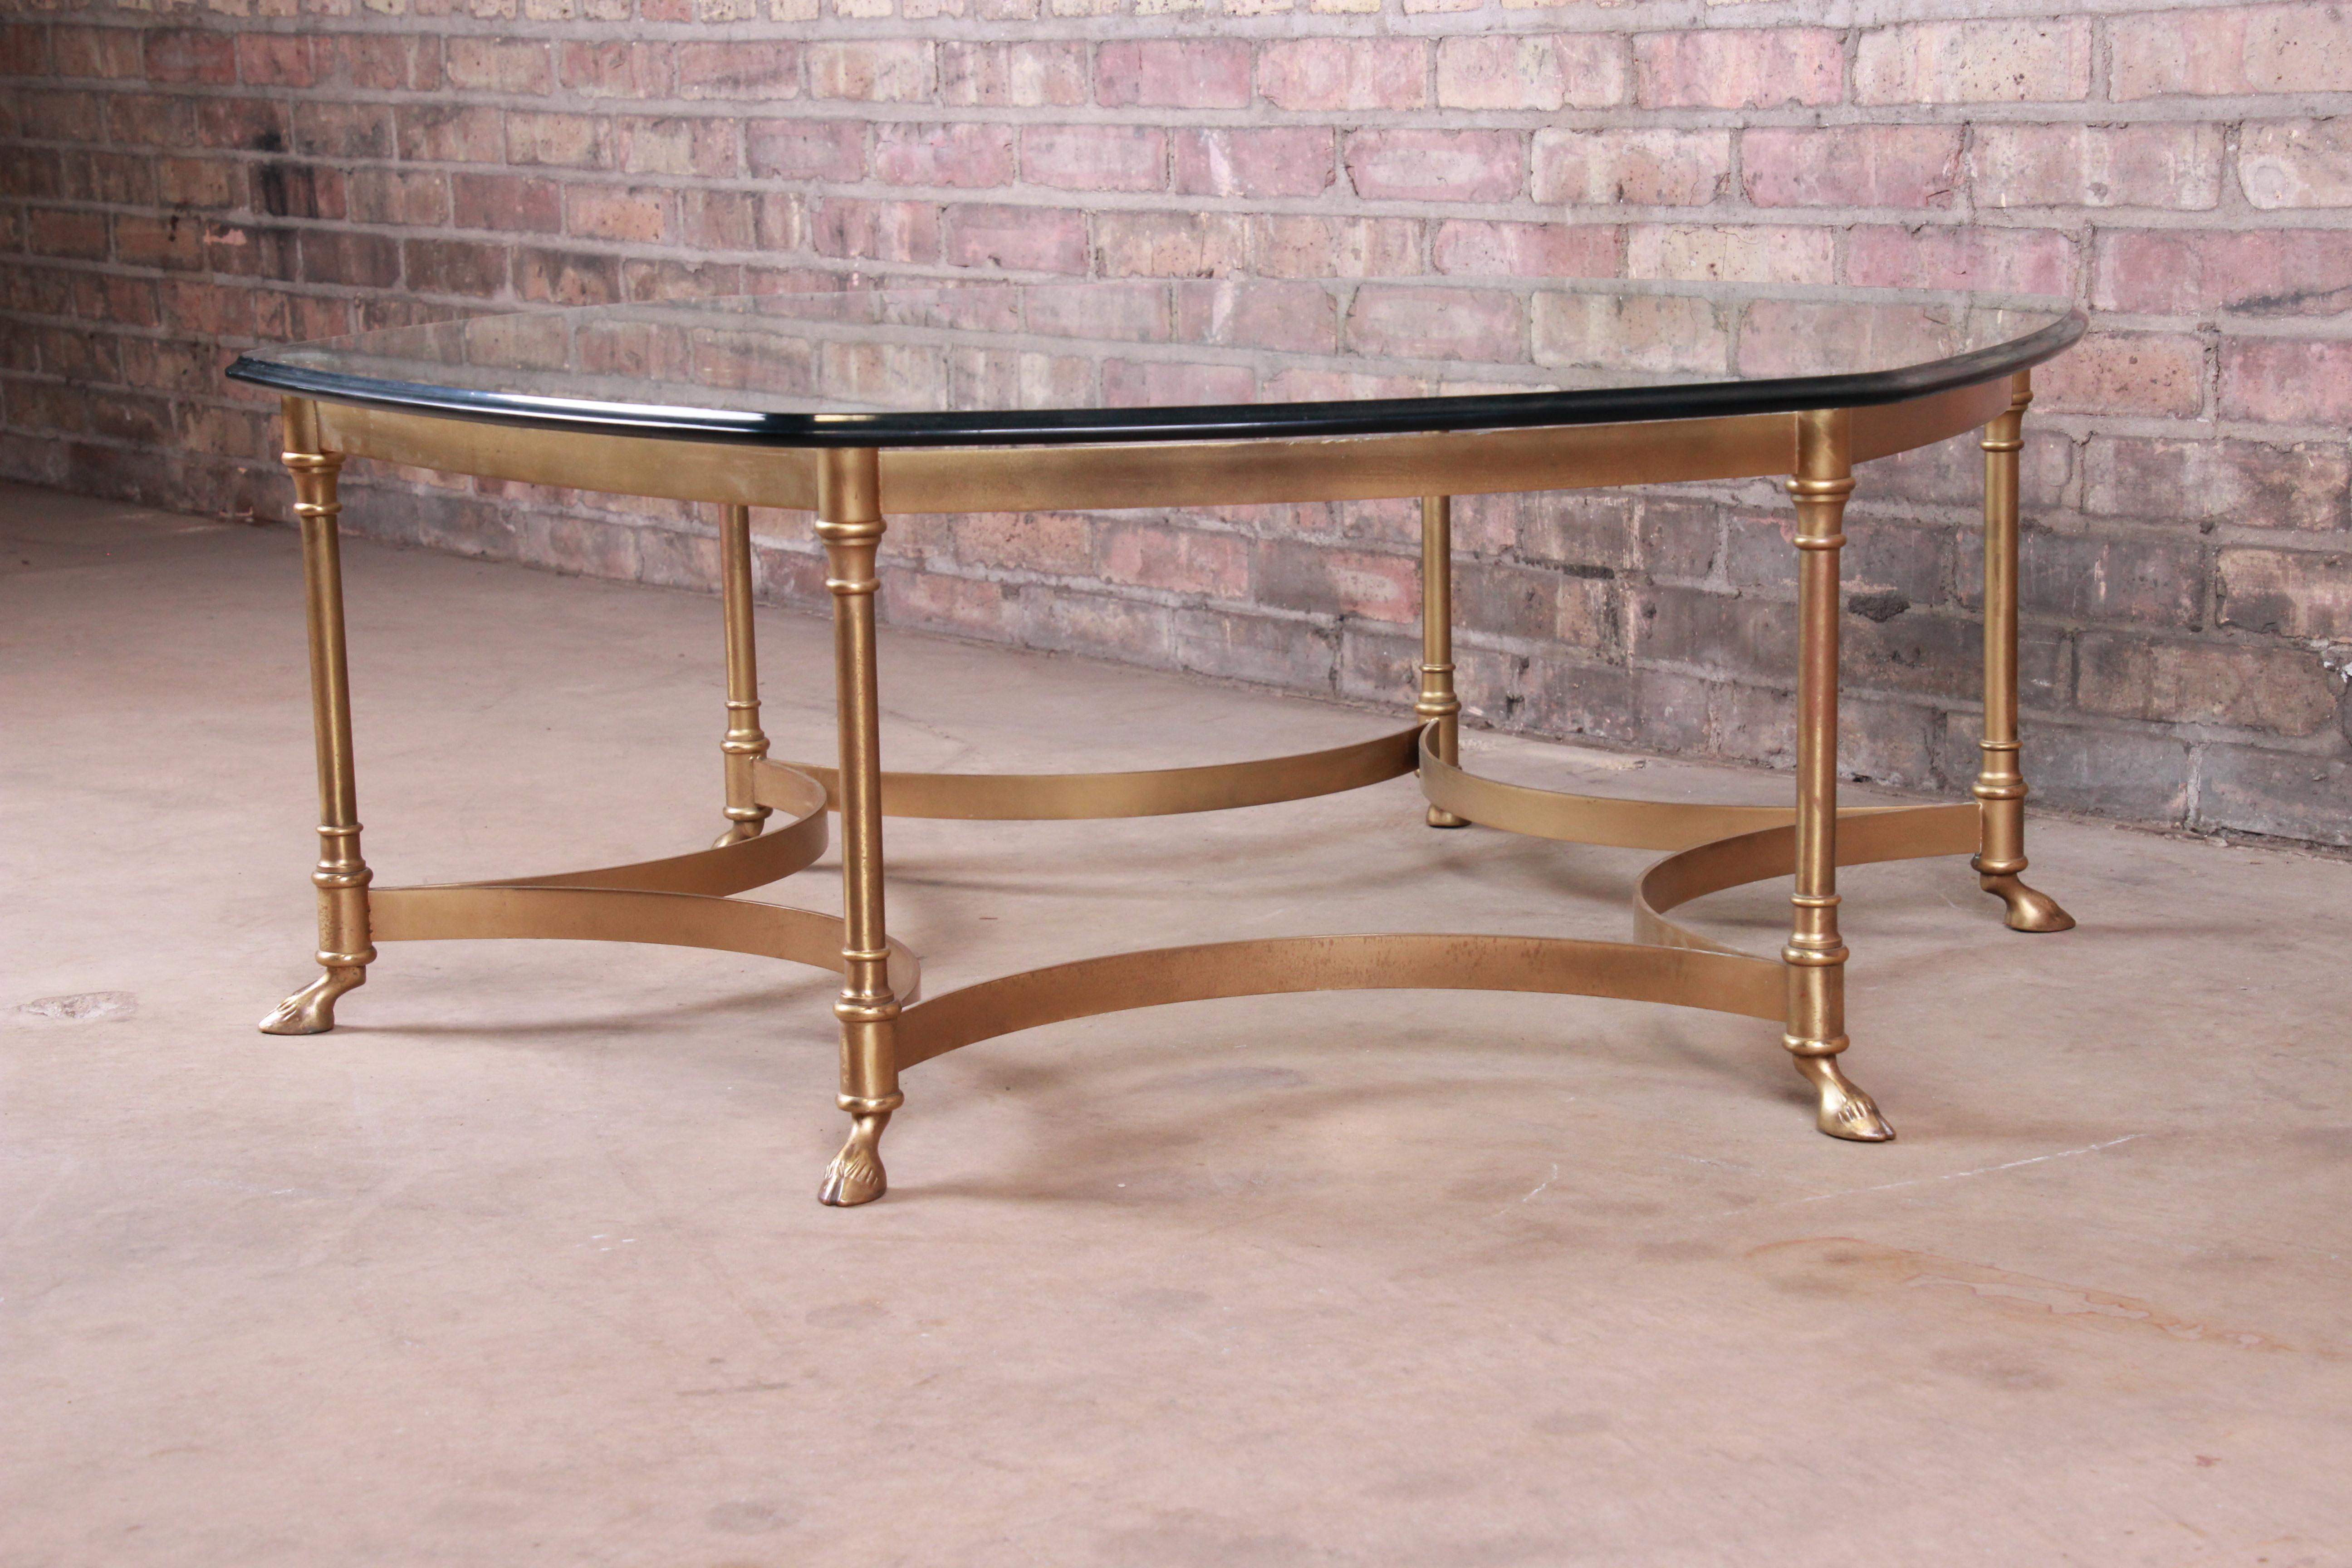 Labarge Hollywood Regency Brass and Glass Hooved Feet Cocktail Table, 1960s For Sale 1